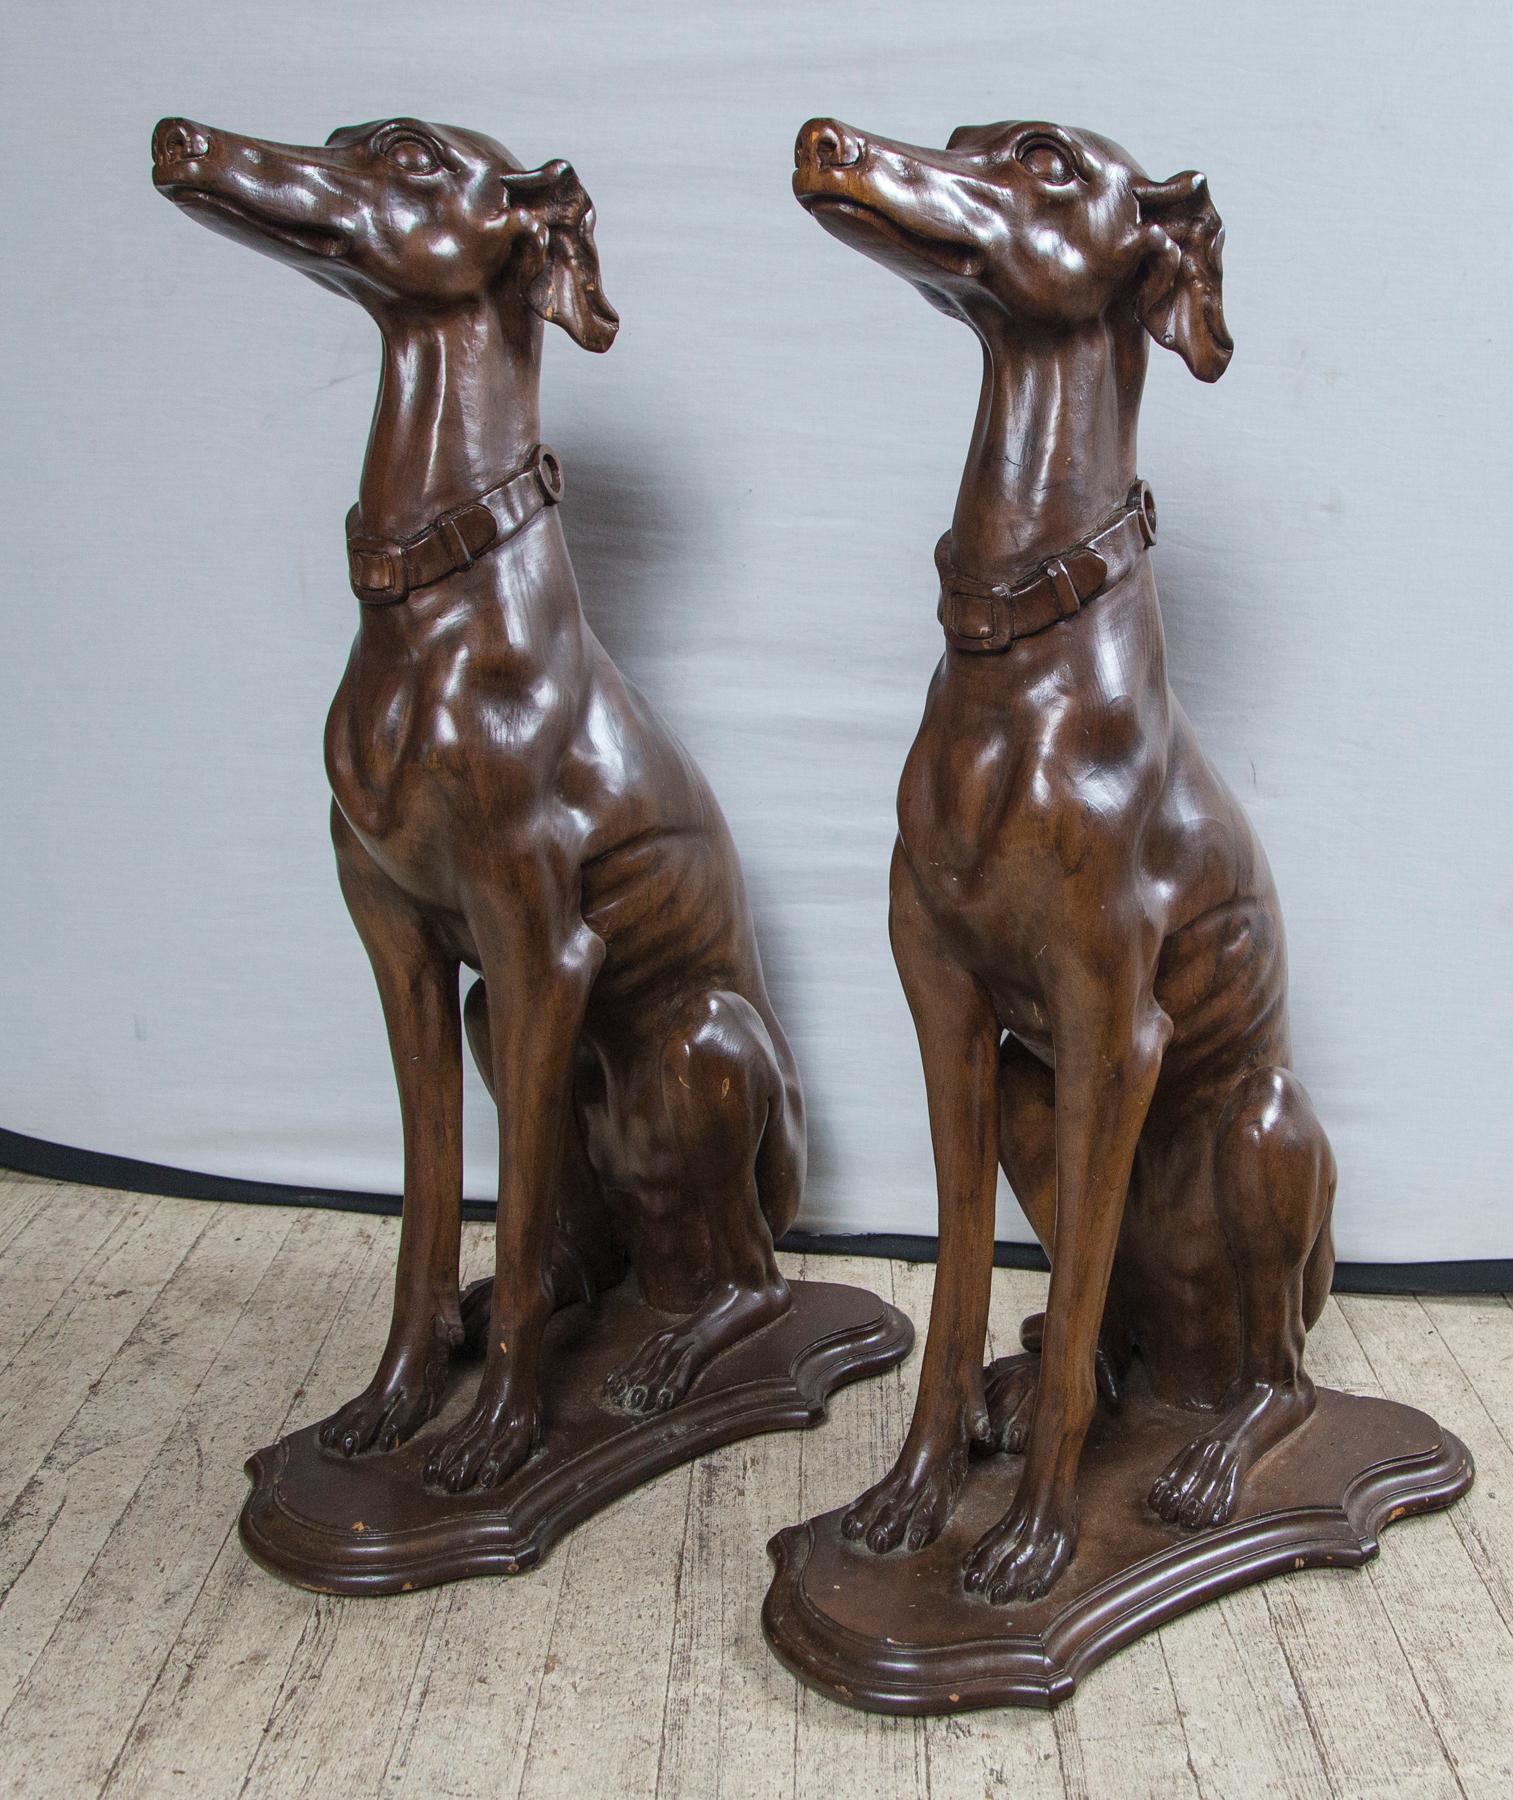 The dogs, which we believe to be whippets or Italian greyhounds, are sitting on their haunches. Each has a buckled dog collar around the neck. They are attached to cartouche shaped bases. The depth and width are the measurements for the cartouche